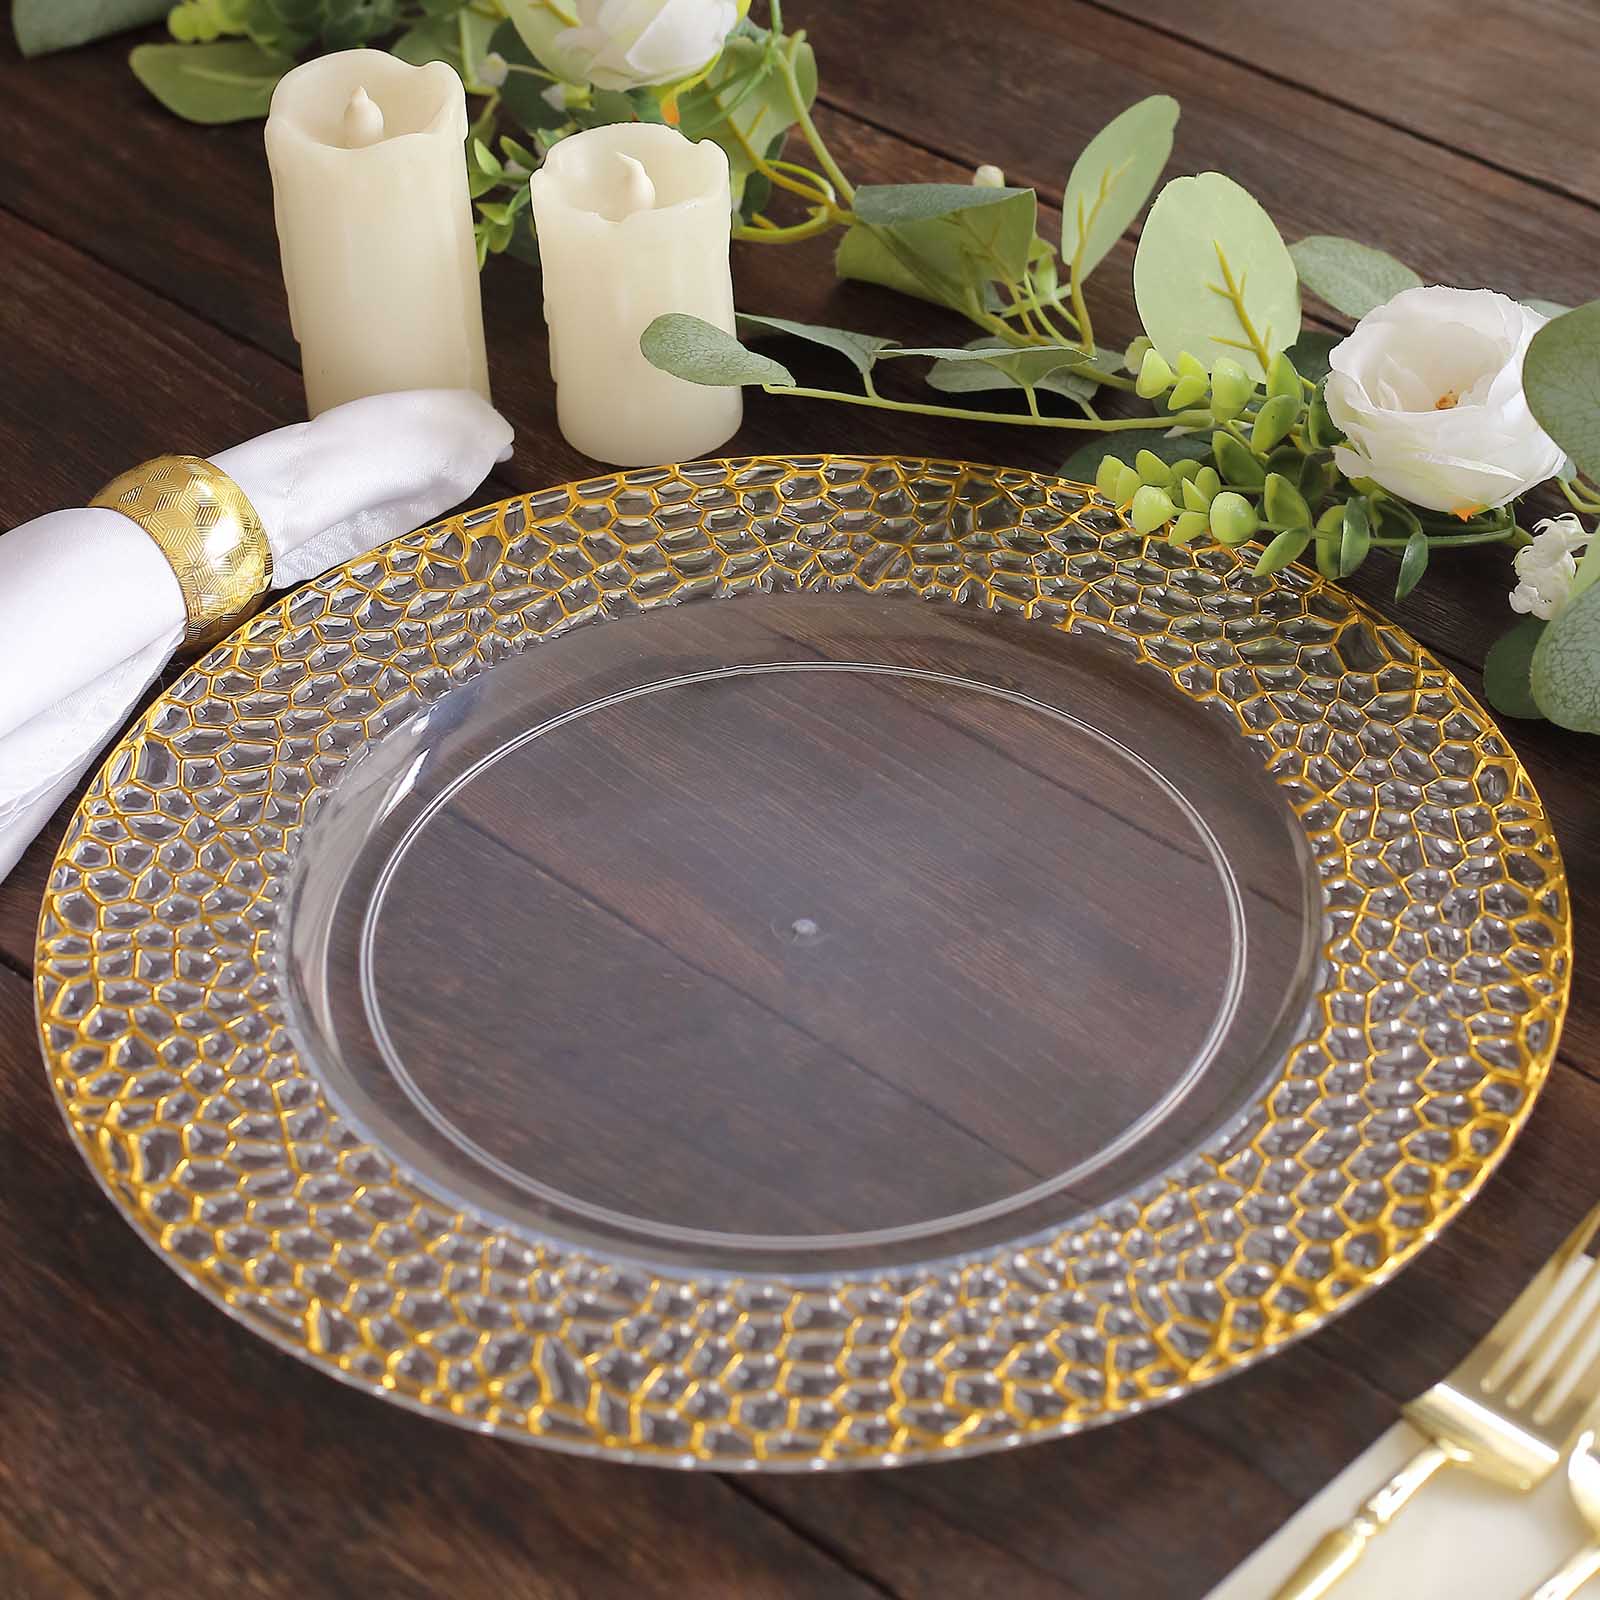 6 Metallic Clear 13 in Round Acrylic Charger Plates with Gold Hammered Rim